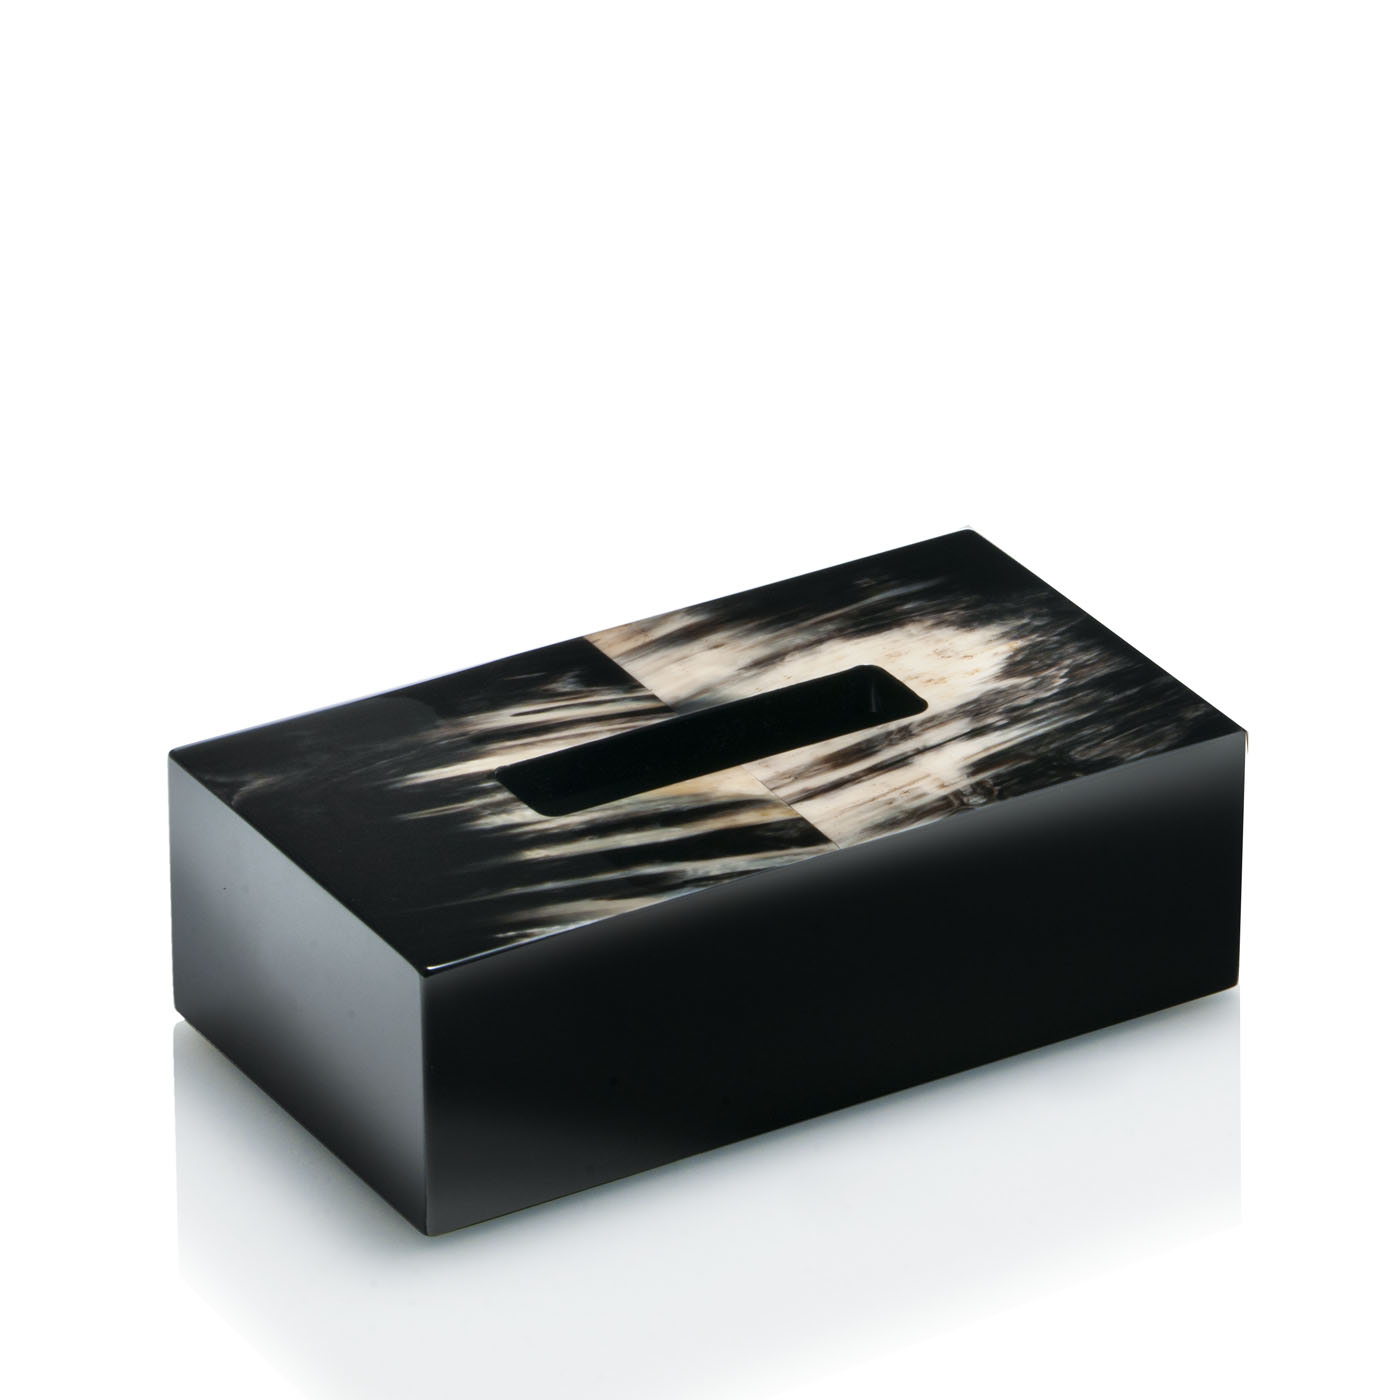 Bath sets - Armida tissue box holder in horn and glossy black lacquered wood - ambiance picture - Arcahorn